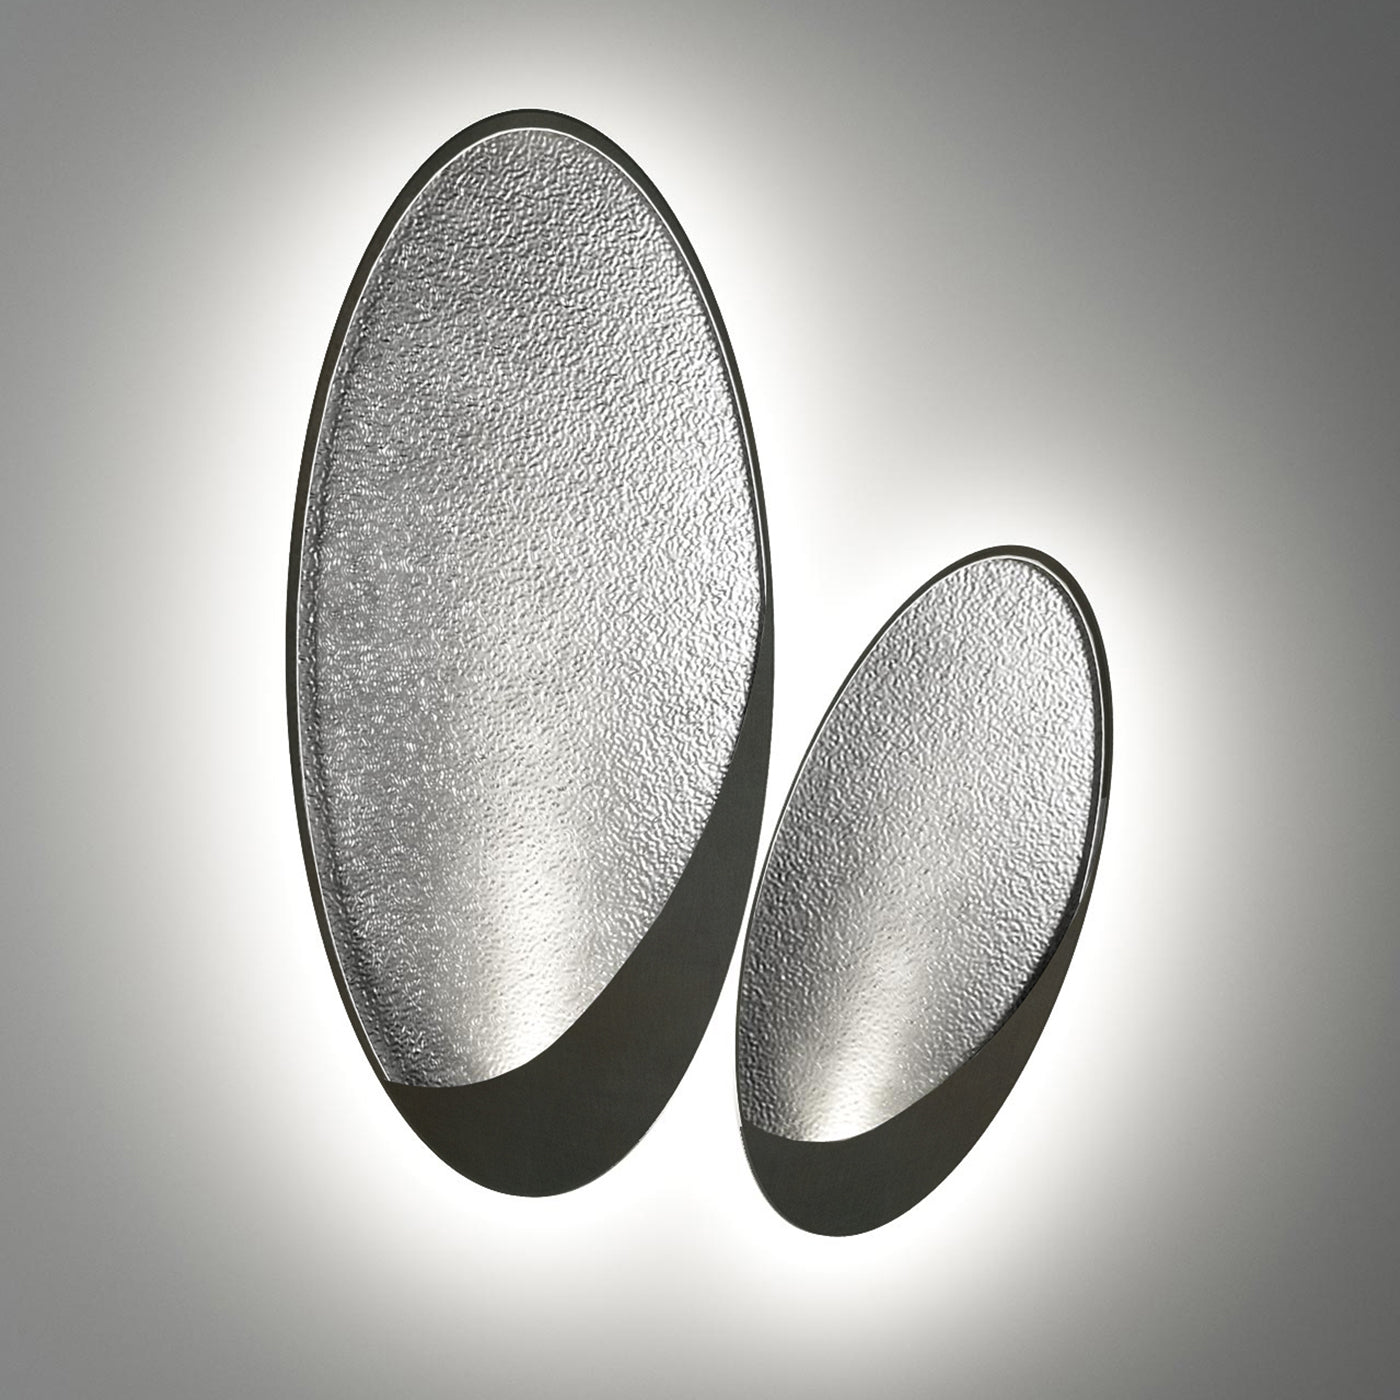 Two-Petal Steel Wall Light Fixture by Mammini Candido - Alternative view 1